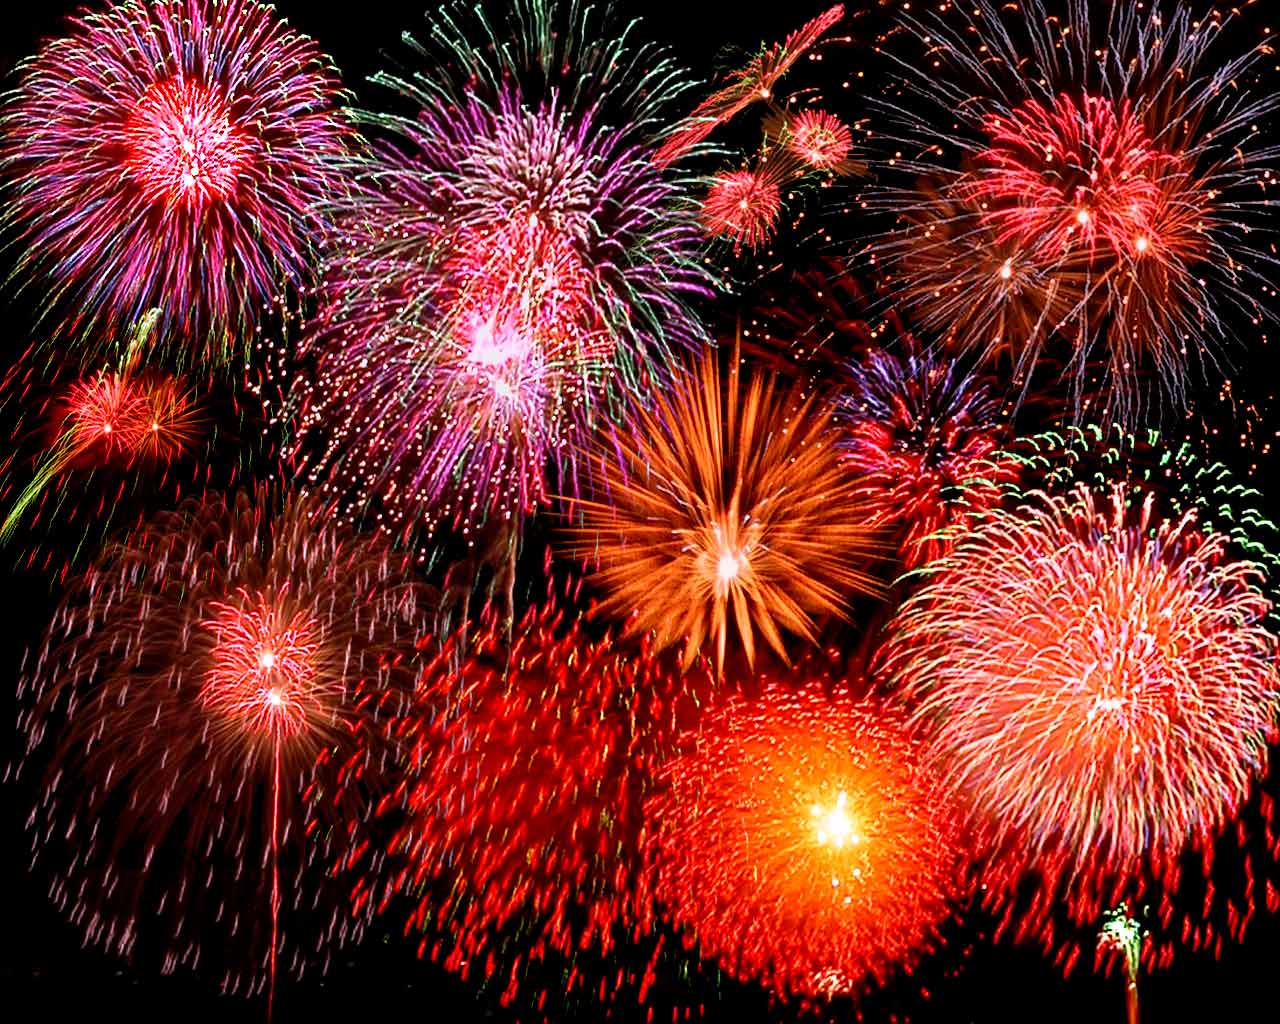 C:\Documents and Settings\jvogus\My Documents\My Pictures\fireworks02.jpg